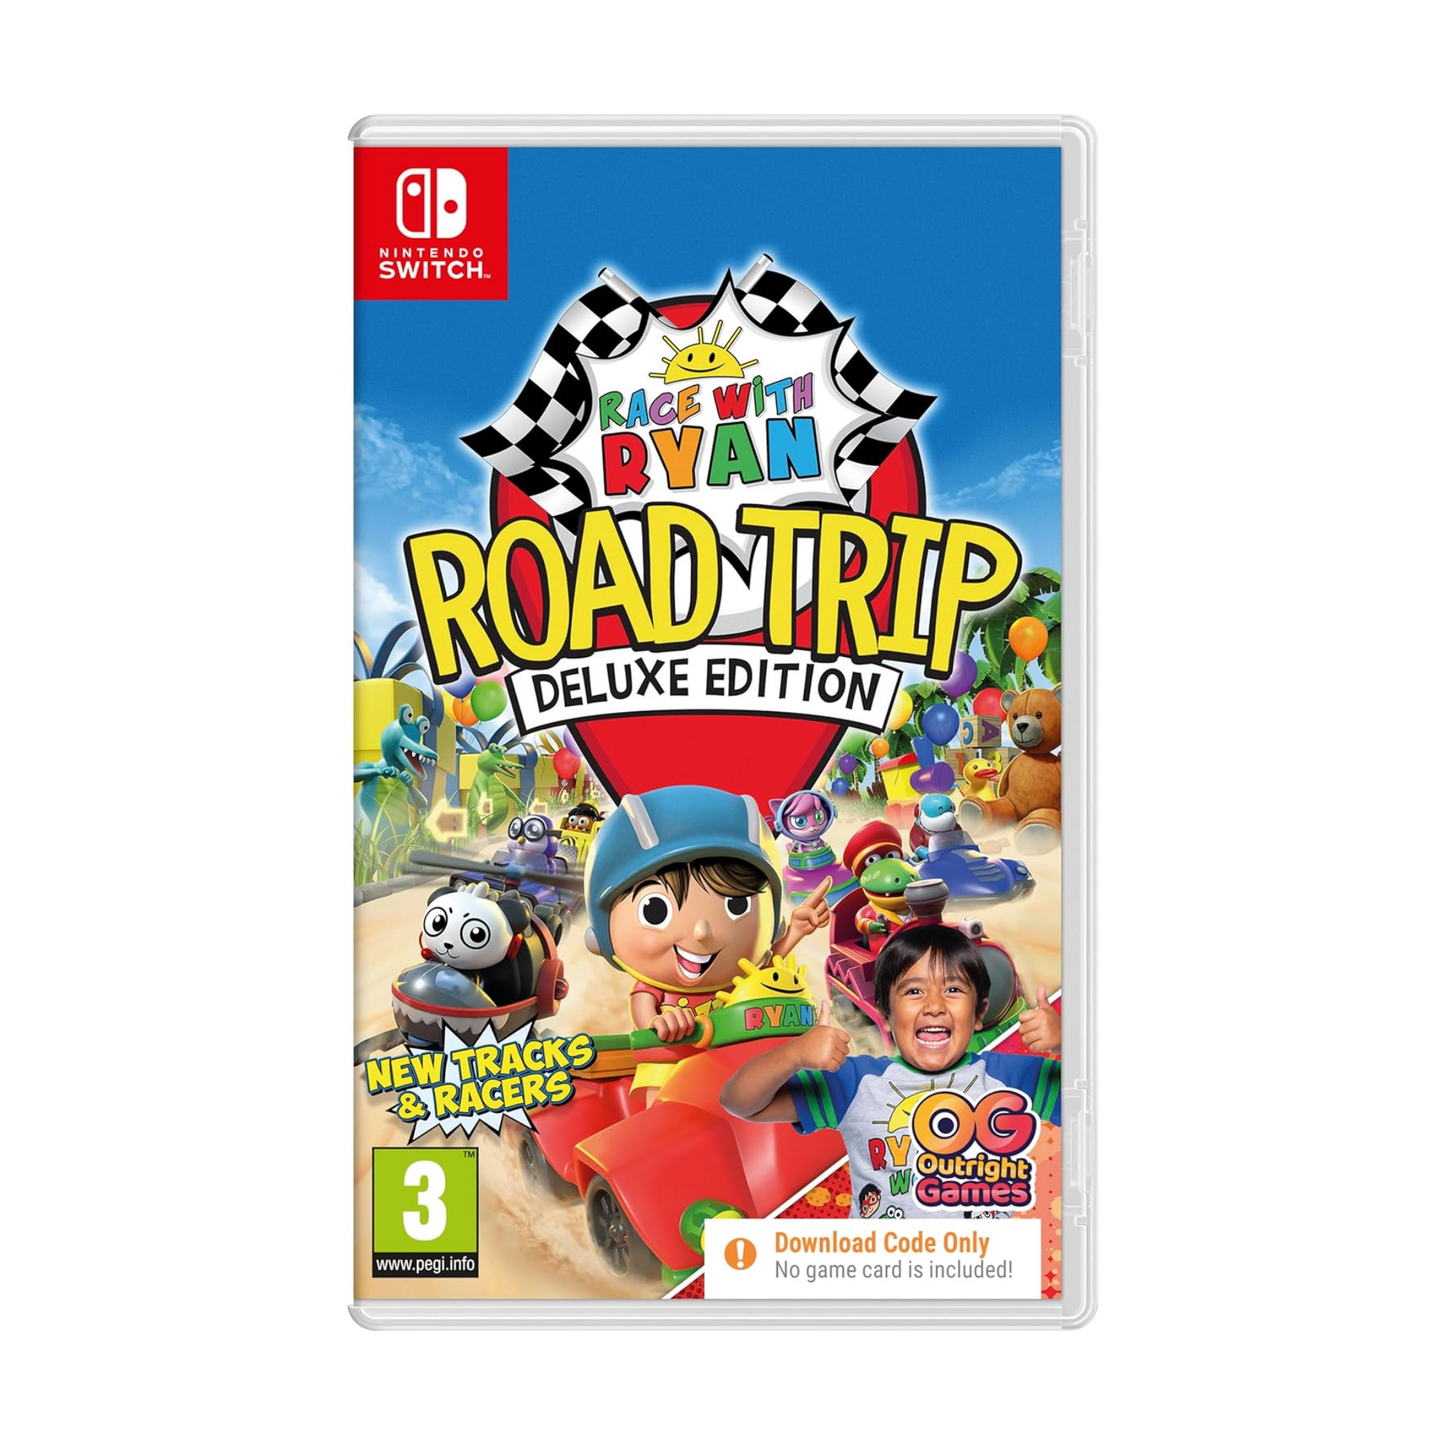 Race with Ryan road trip Deluxe edition video game for Nintendo Switch